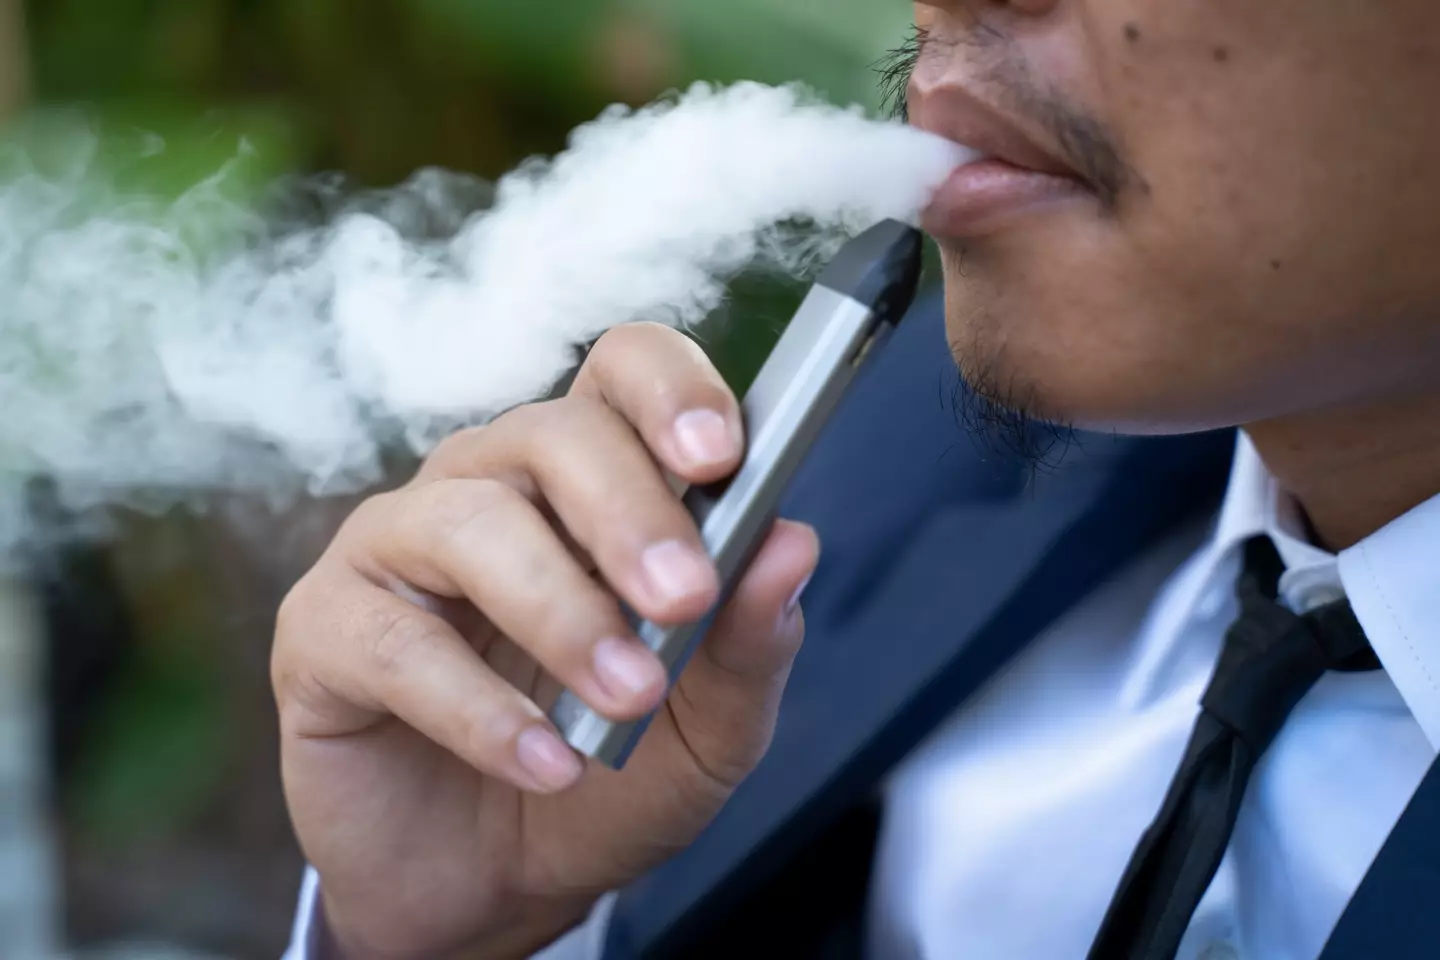 Vaping has been linked to heart failure.